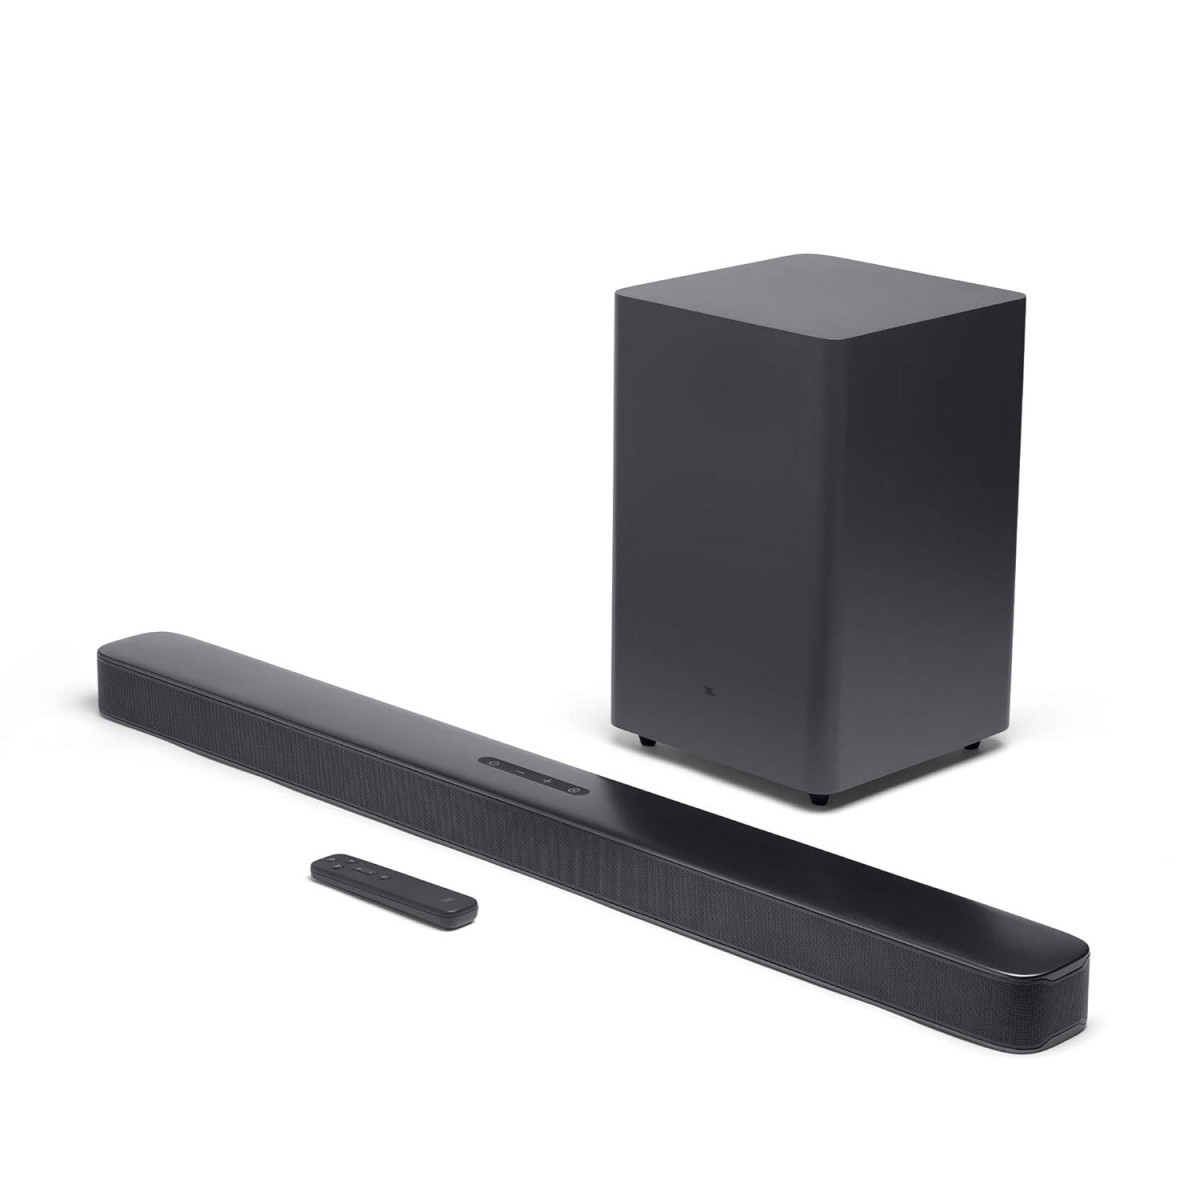 JBL Bar 21 Deep Bass Dolby Digital Soundbar with Wireless Subwoofer for Extra Deep Bass 21 Channel Home Theatre with Remote Surround Sound HDMI ARC Bluetooth  Optical Connectivity 300W